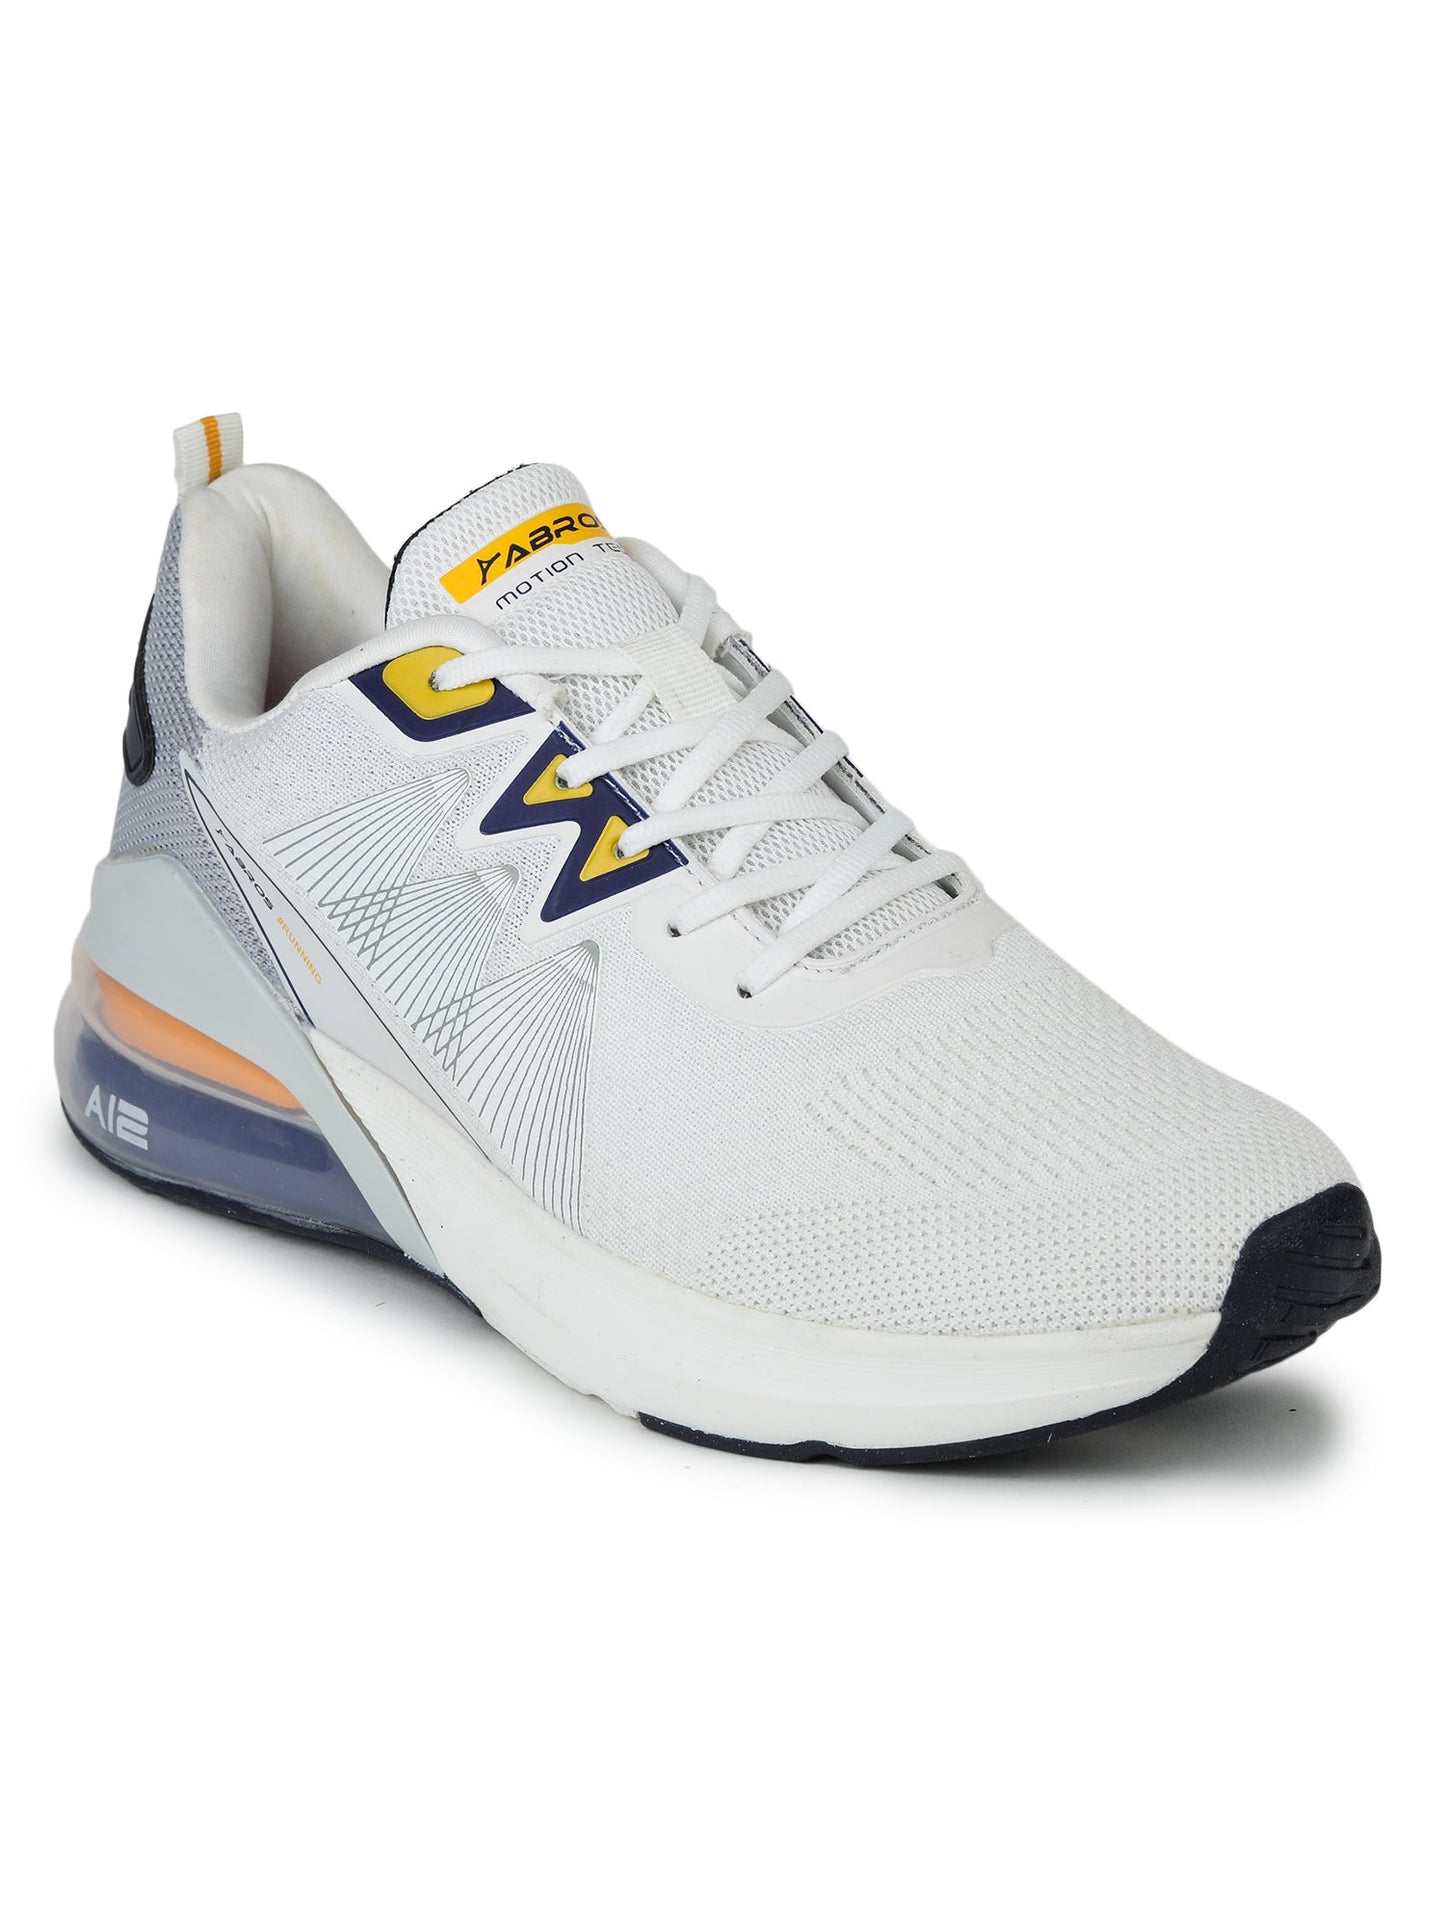 ABROS FANG SPORT-SHOES For MEN'S